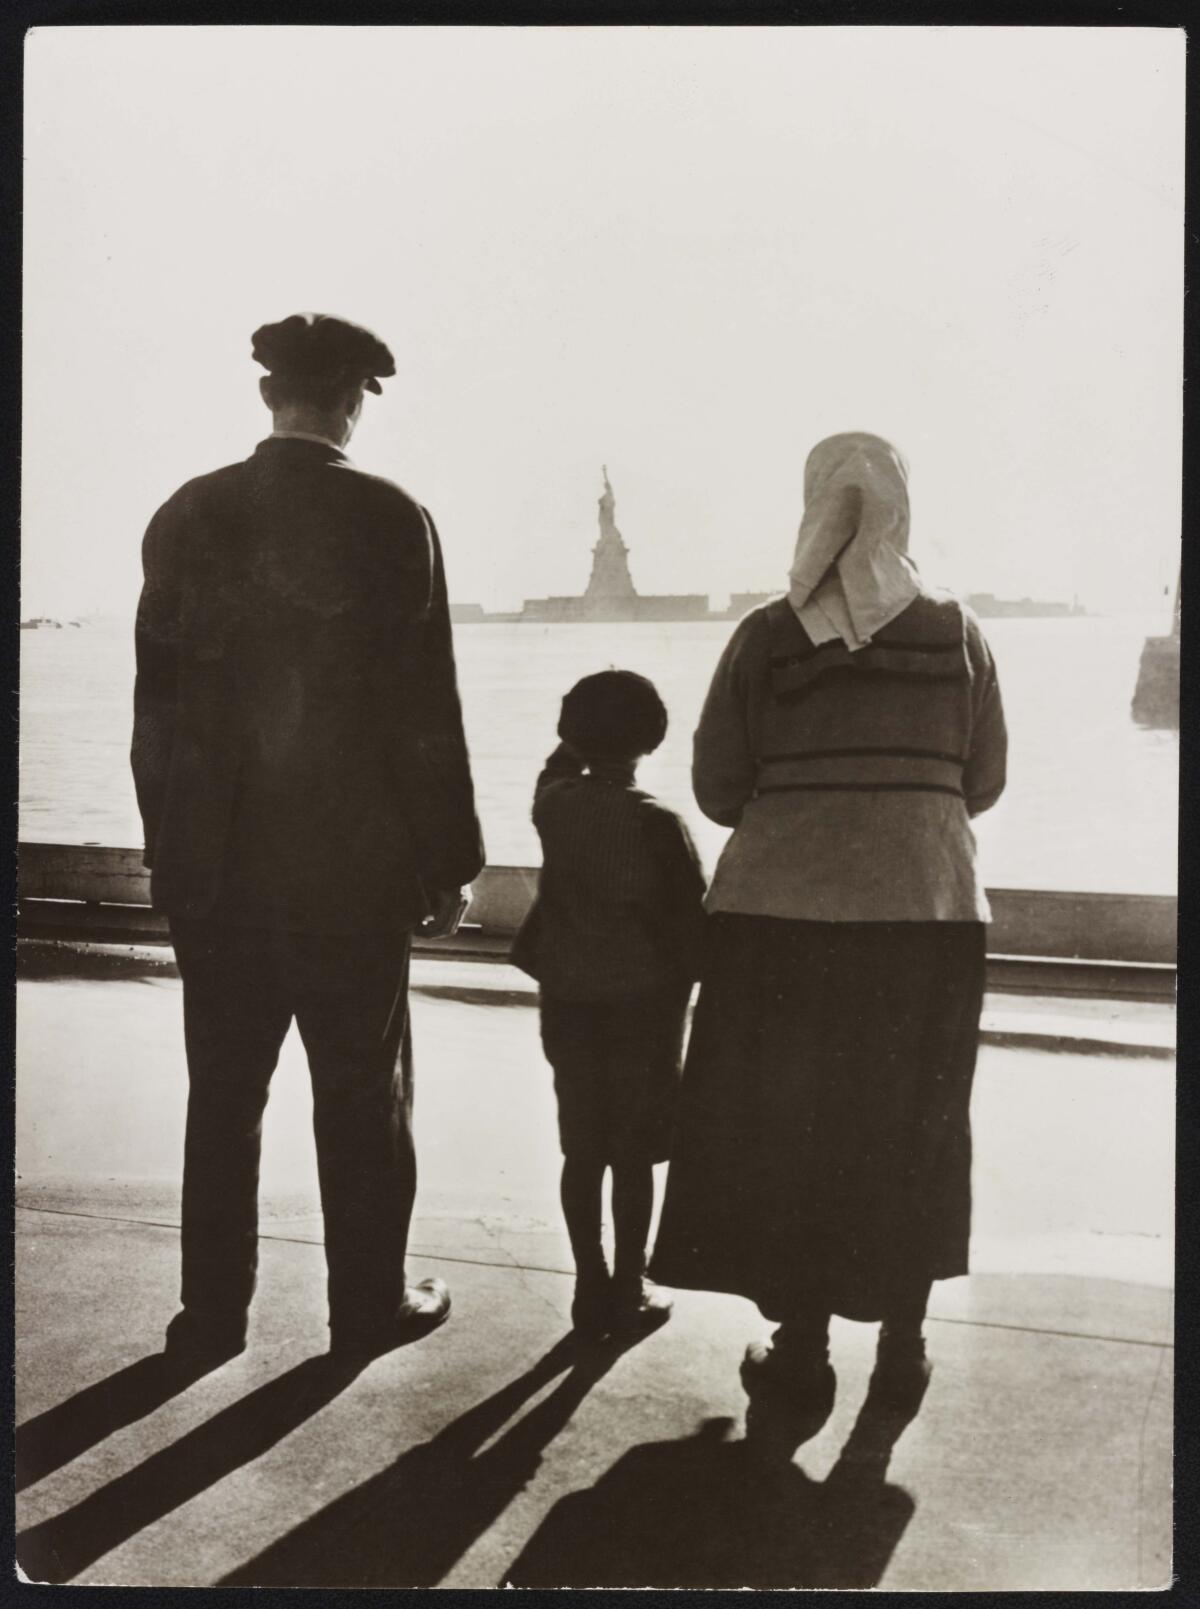 A photo from "The U.S. and the Holocaust" shows an immigrant family looking across the water to the Statue of Liberty.